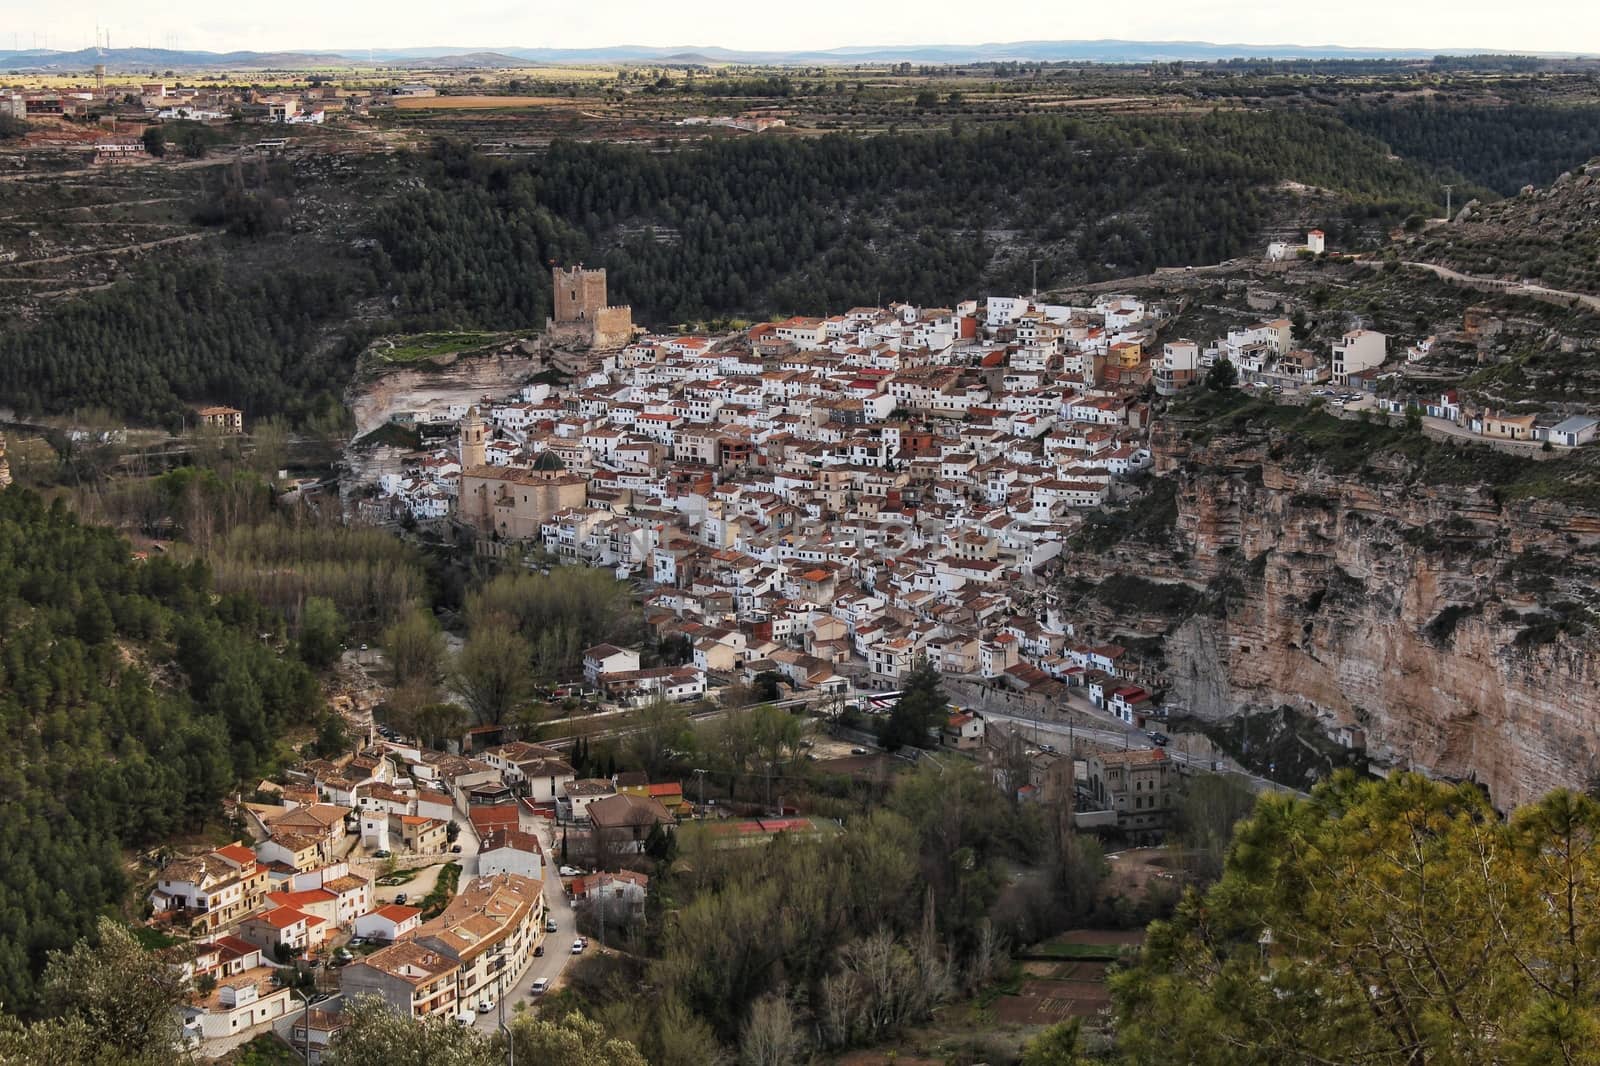 Views of the village of Alcala del Jucar in the morning from the viewpoint by soniabonet